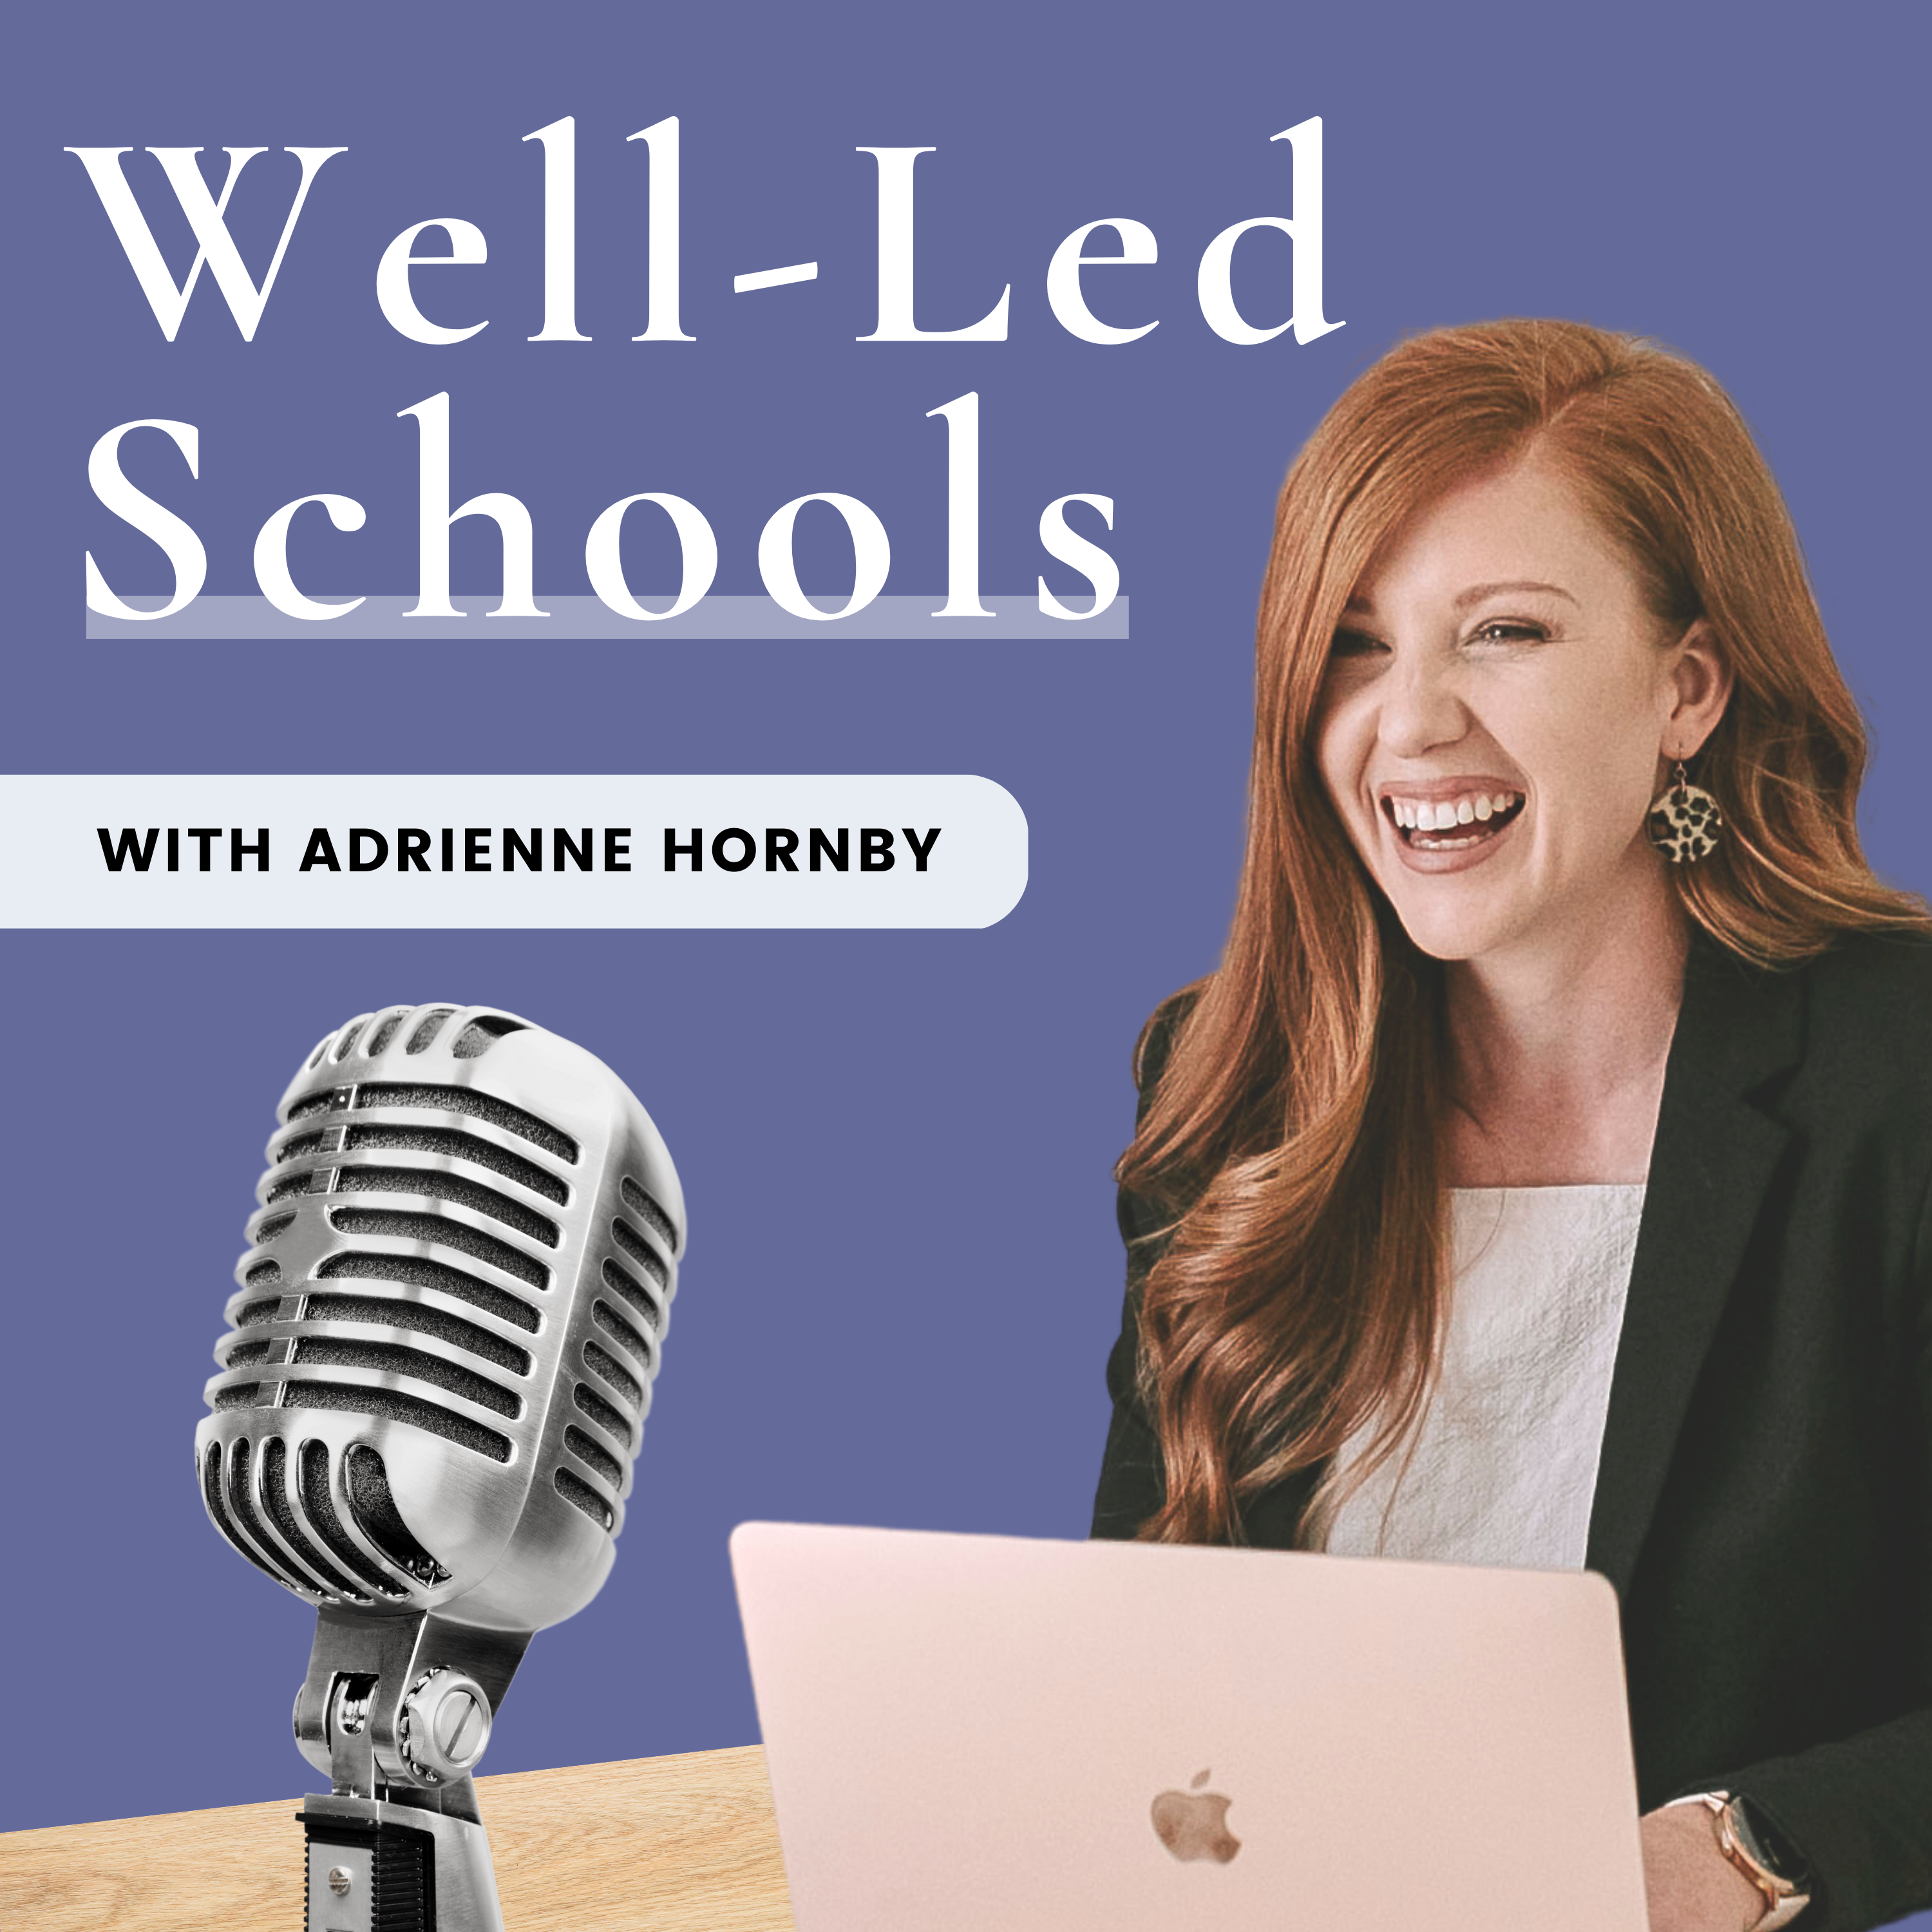 S2E10: Strategies to Support Parents and Carers to Cultivate Connection With Their Children with Kathy Bowers